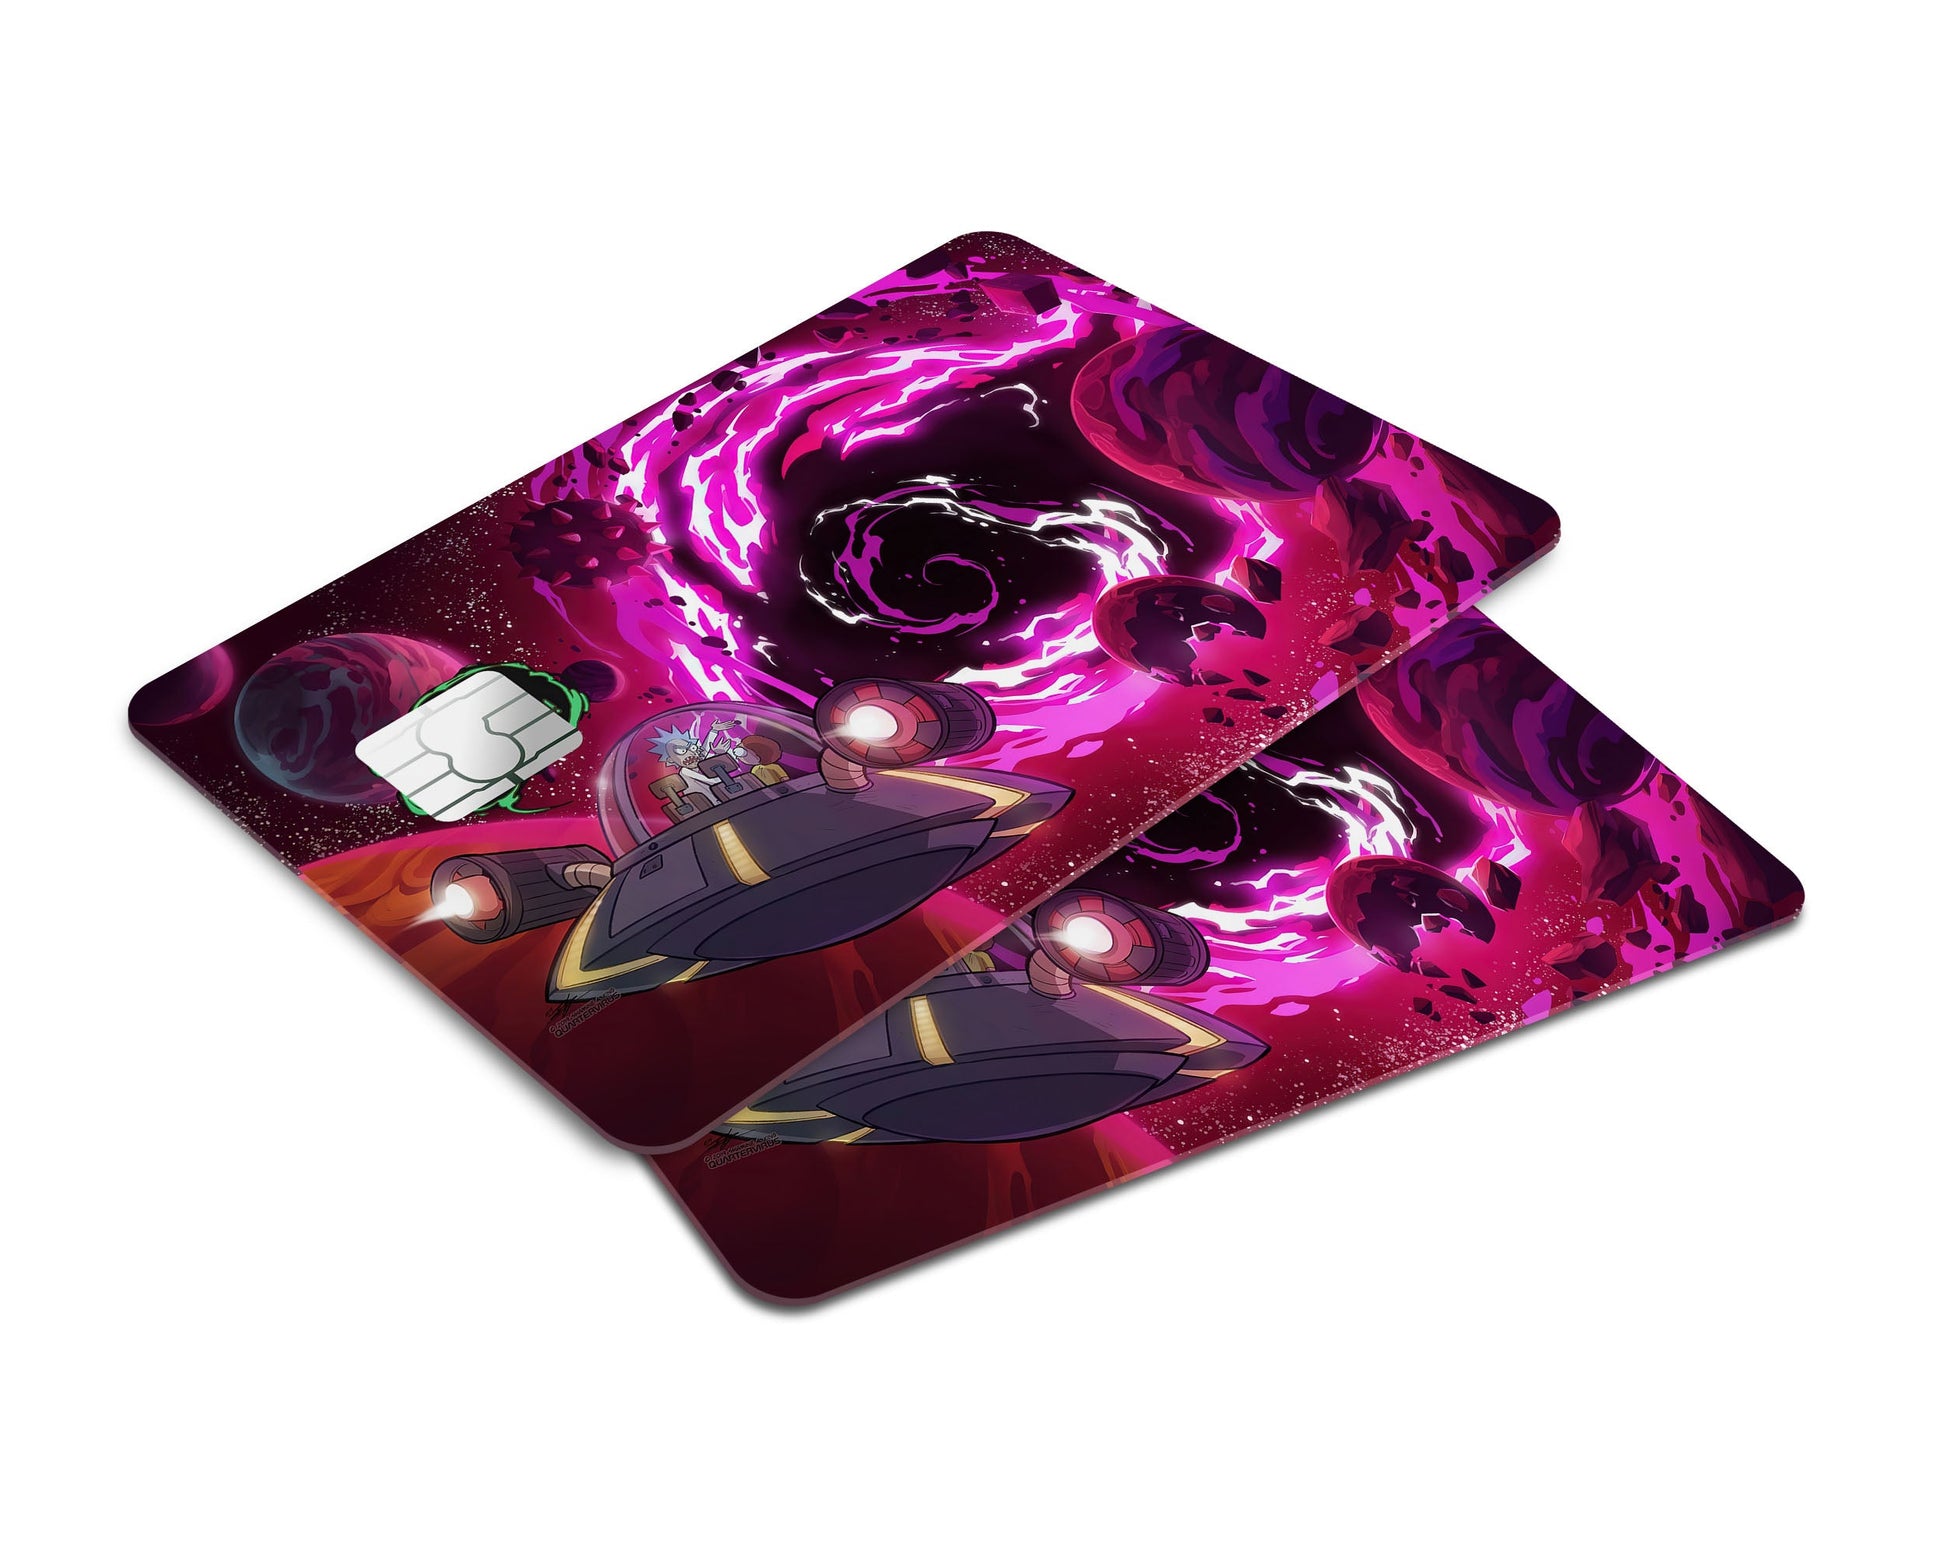 Anime Town Creations Credit Card Rick and Morty Space Travel Purple Window Skins - Anime Rick and Morty Credit Card Skin